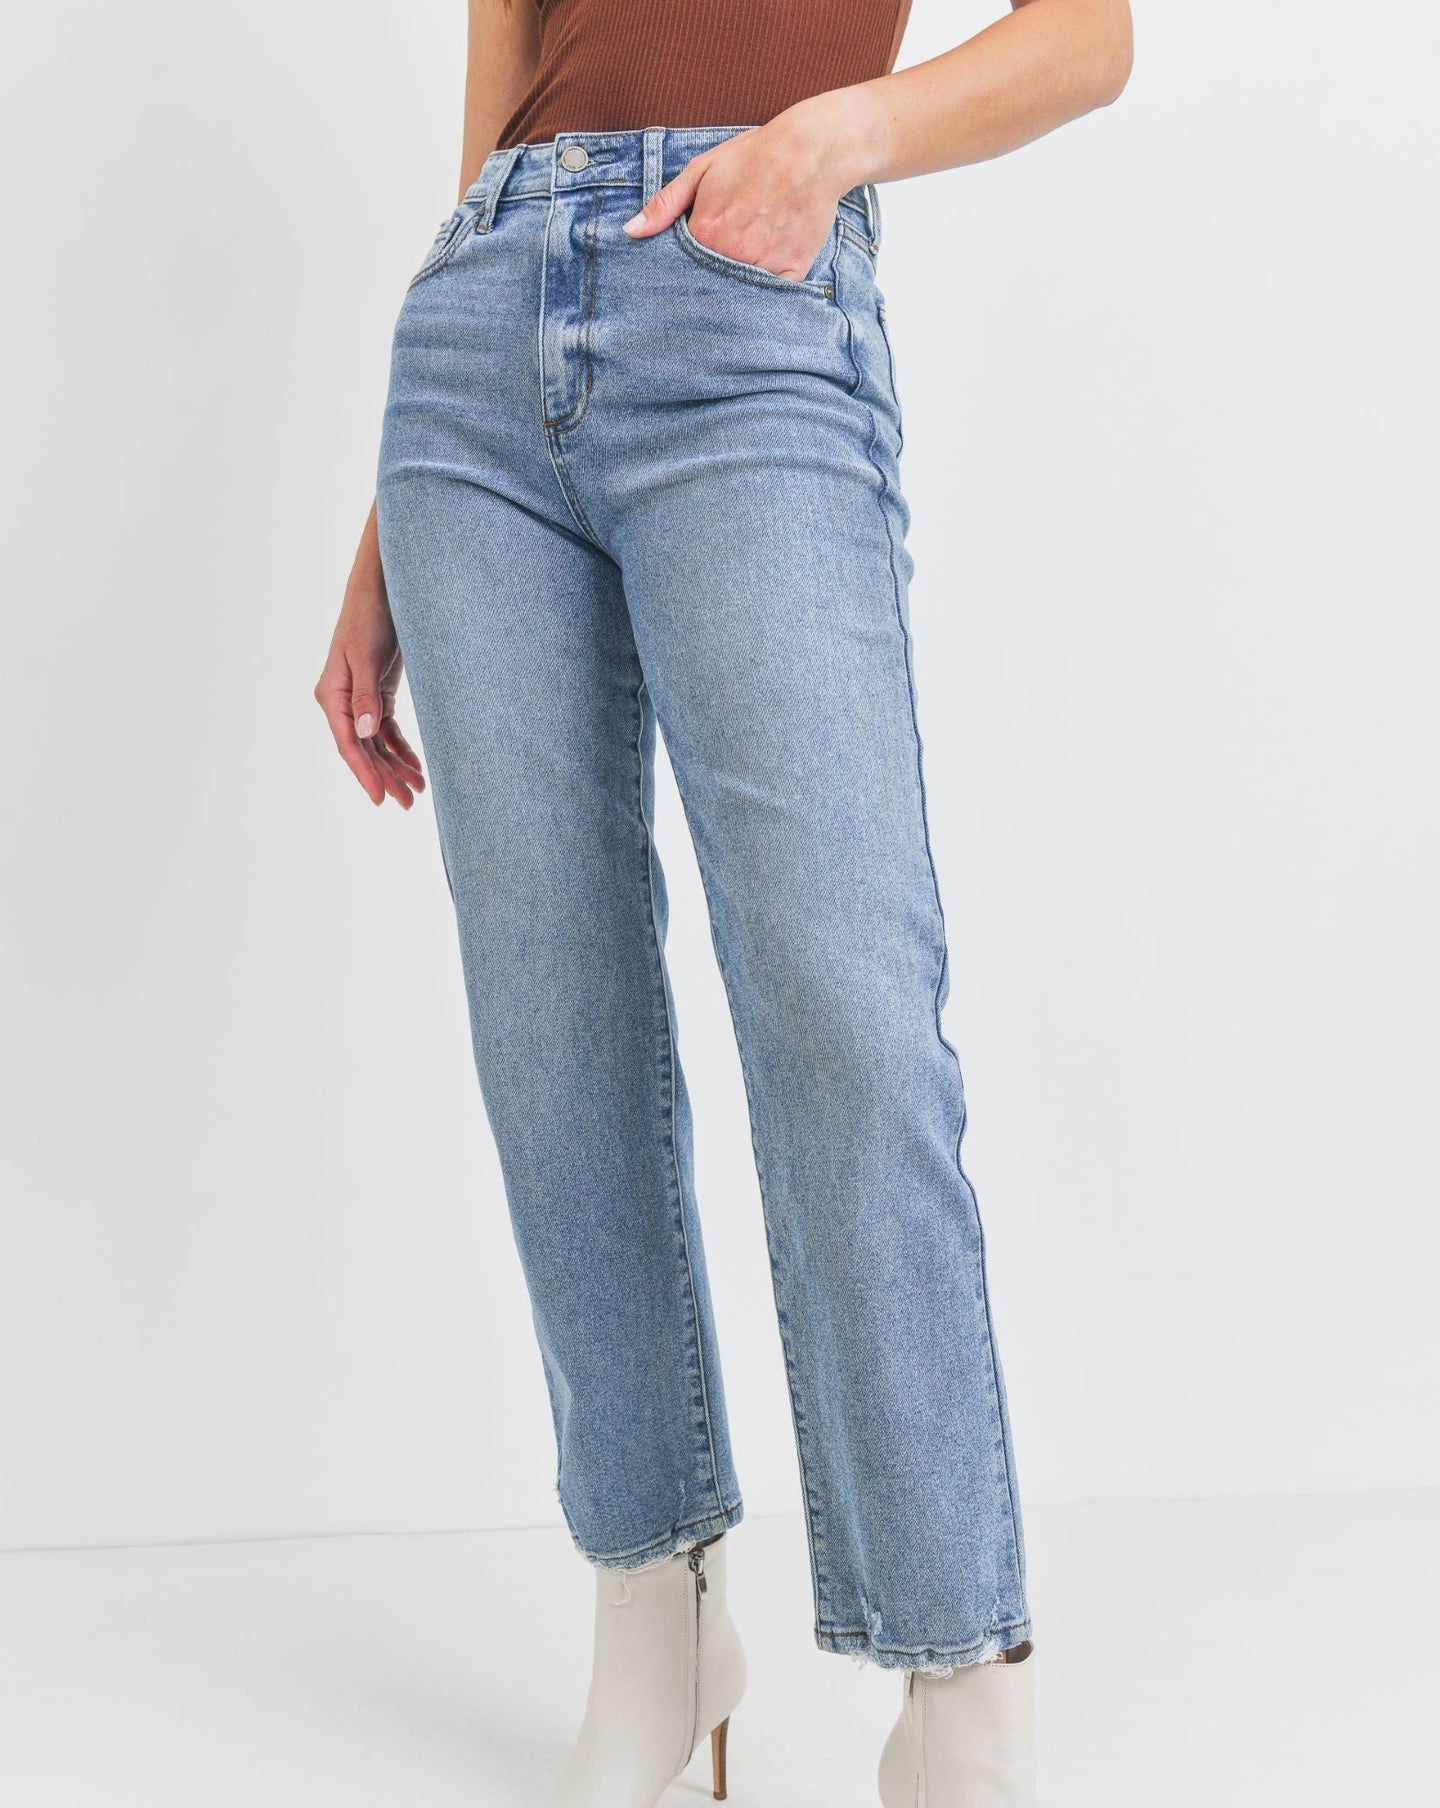 Center Stage Jeans